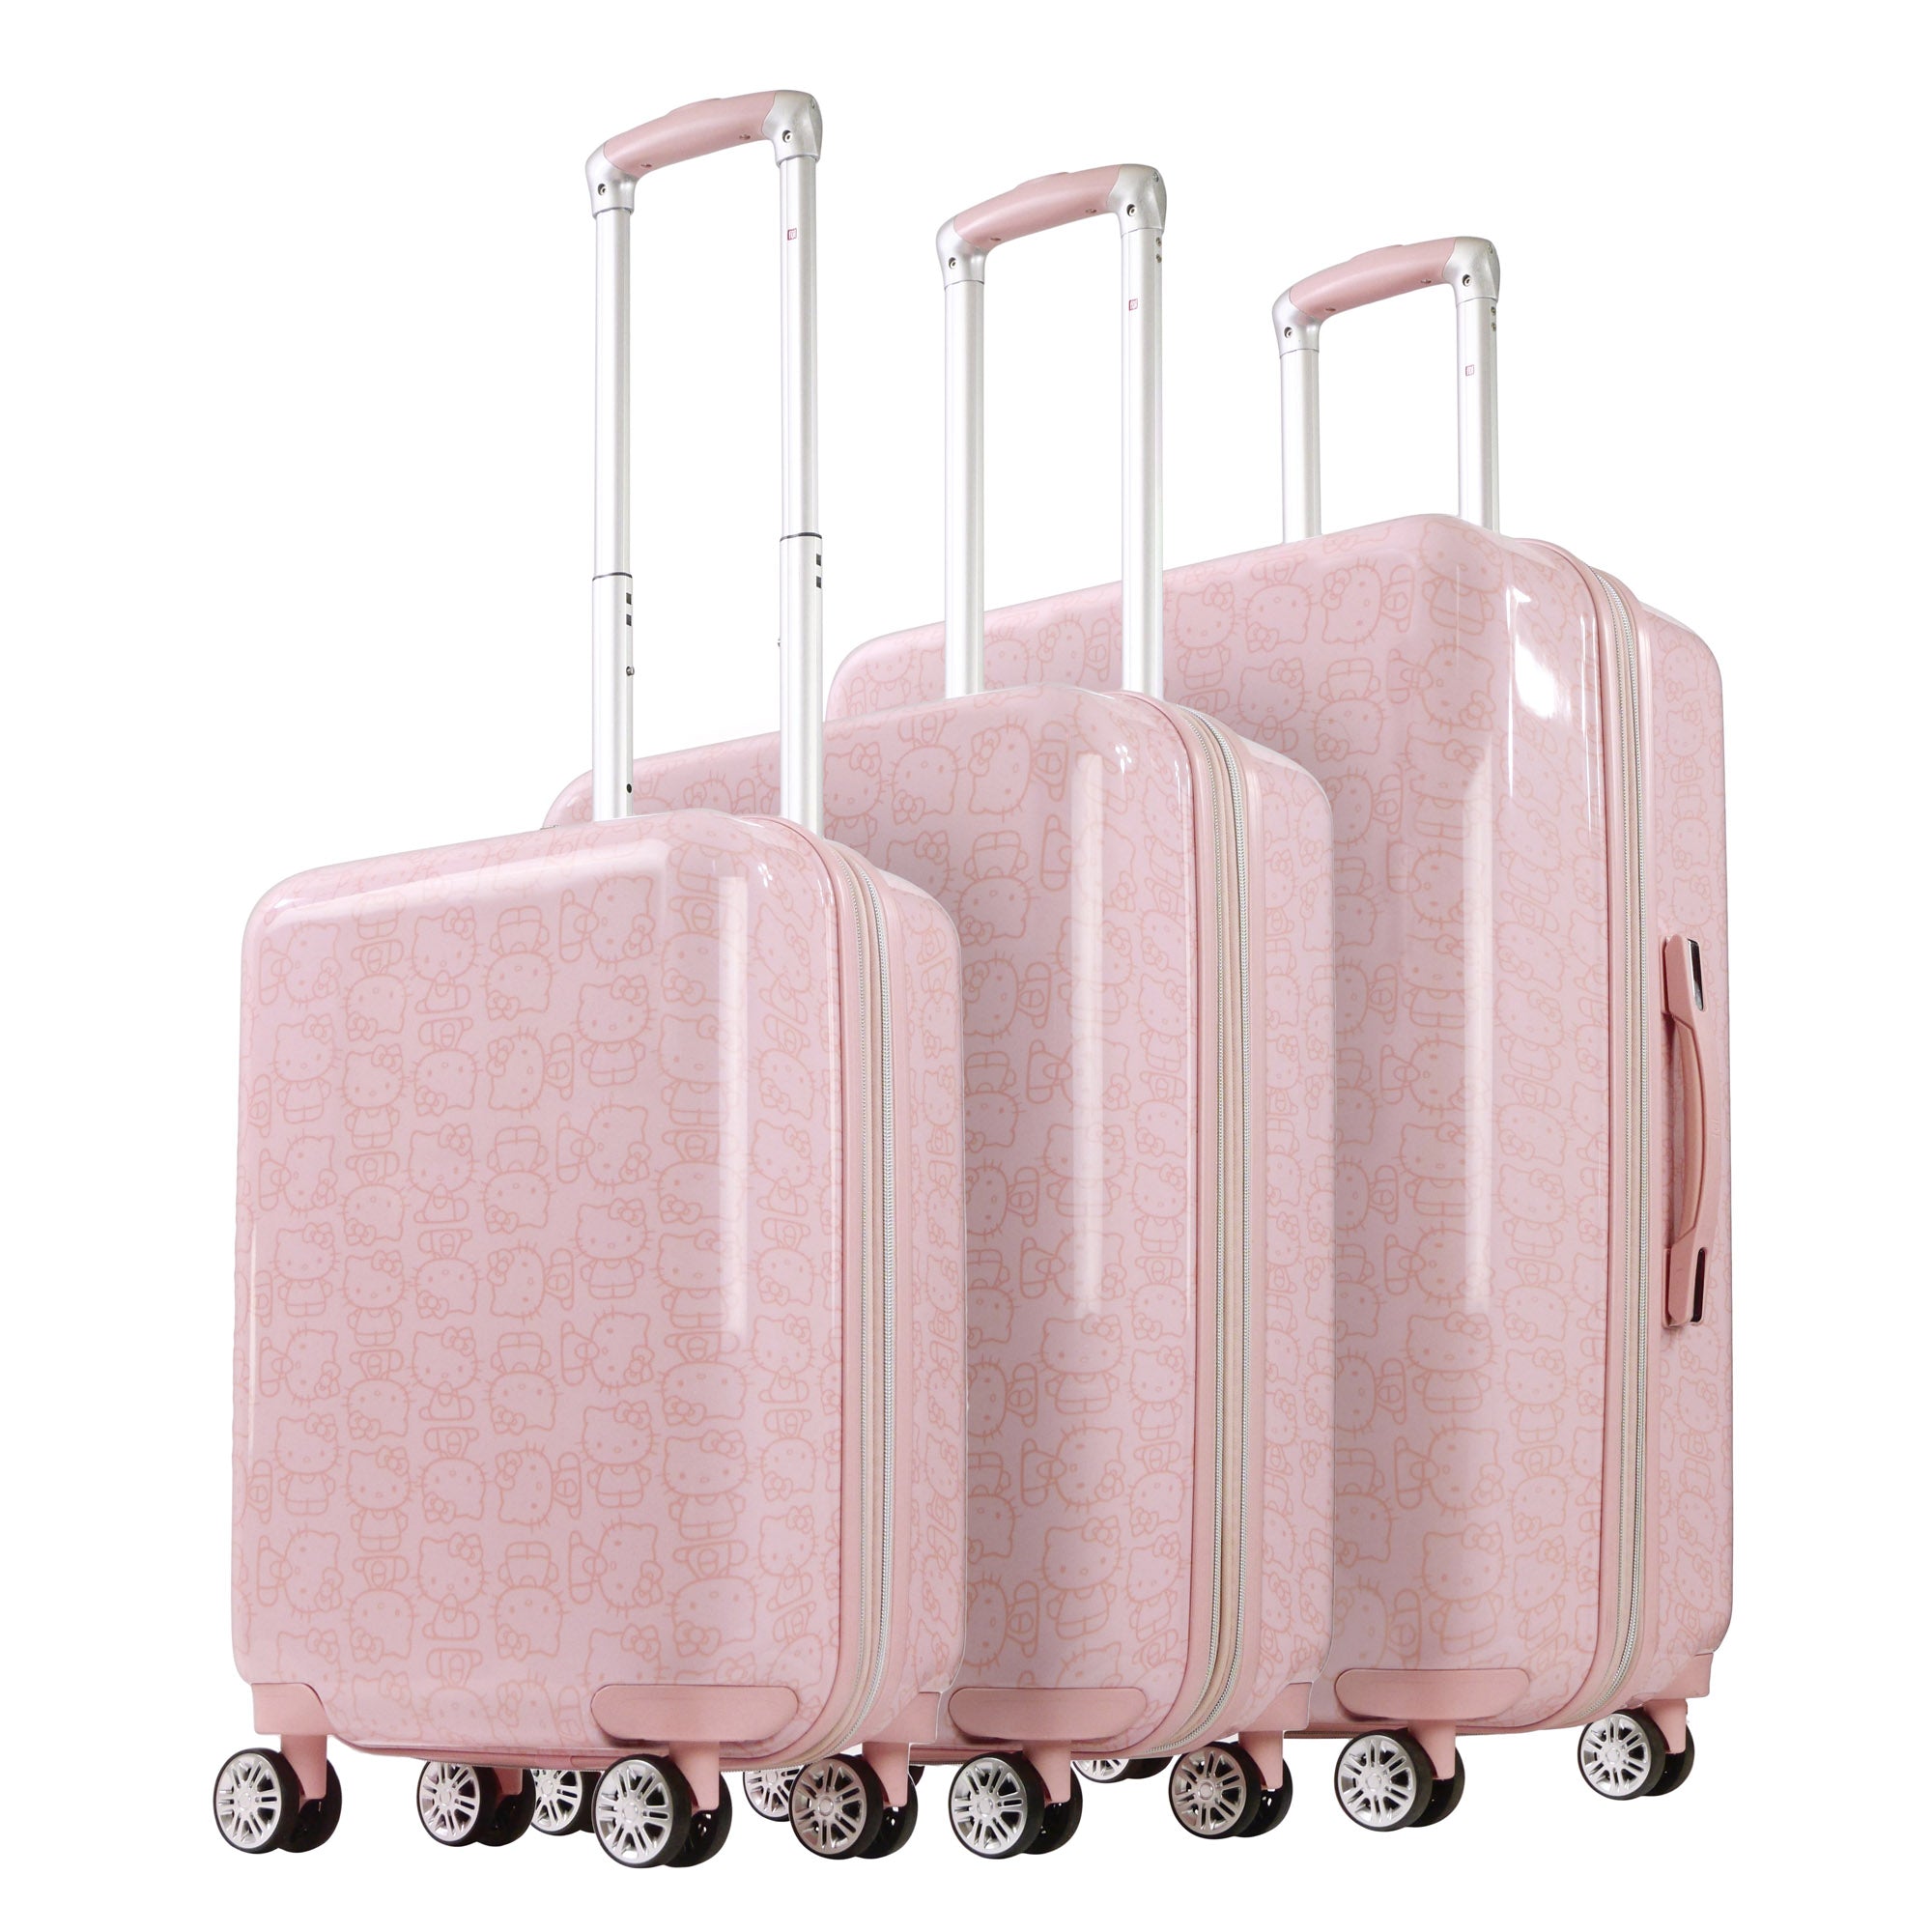 Hello Kitty x FUL 3-Piece Hardshell Luggage Set in Pink Travel Concept 1   